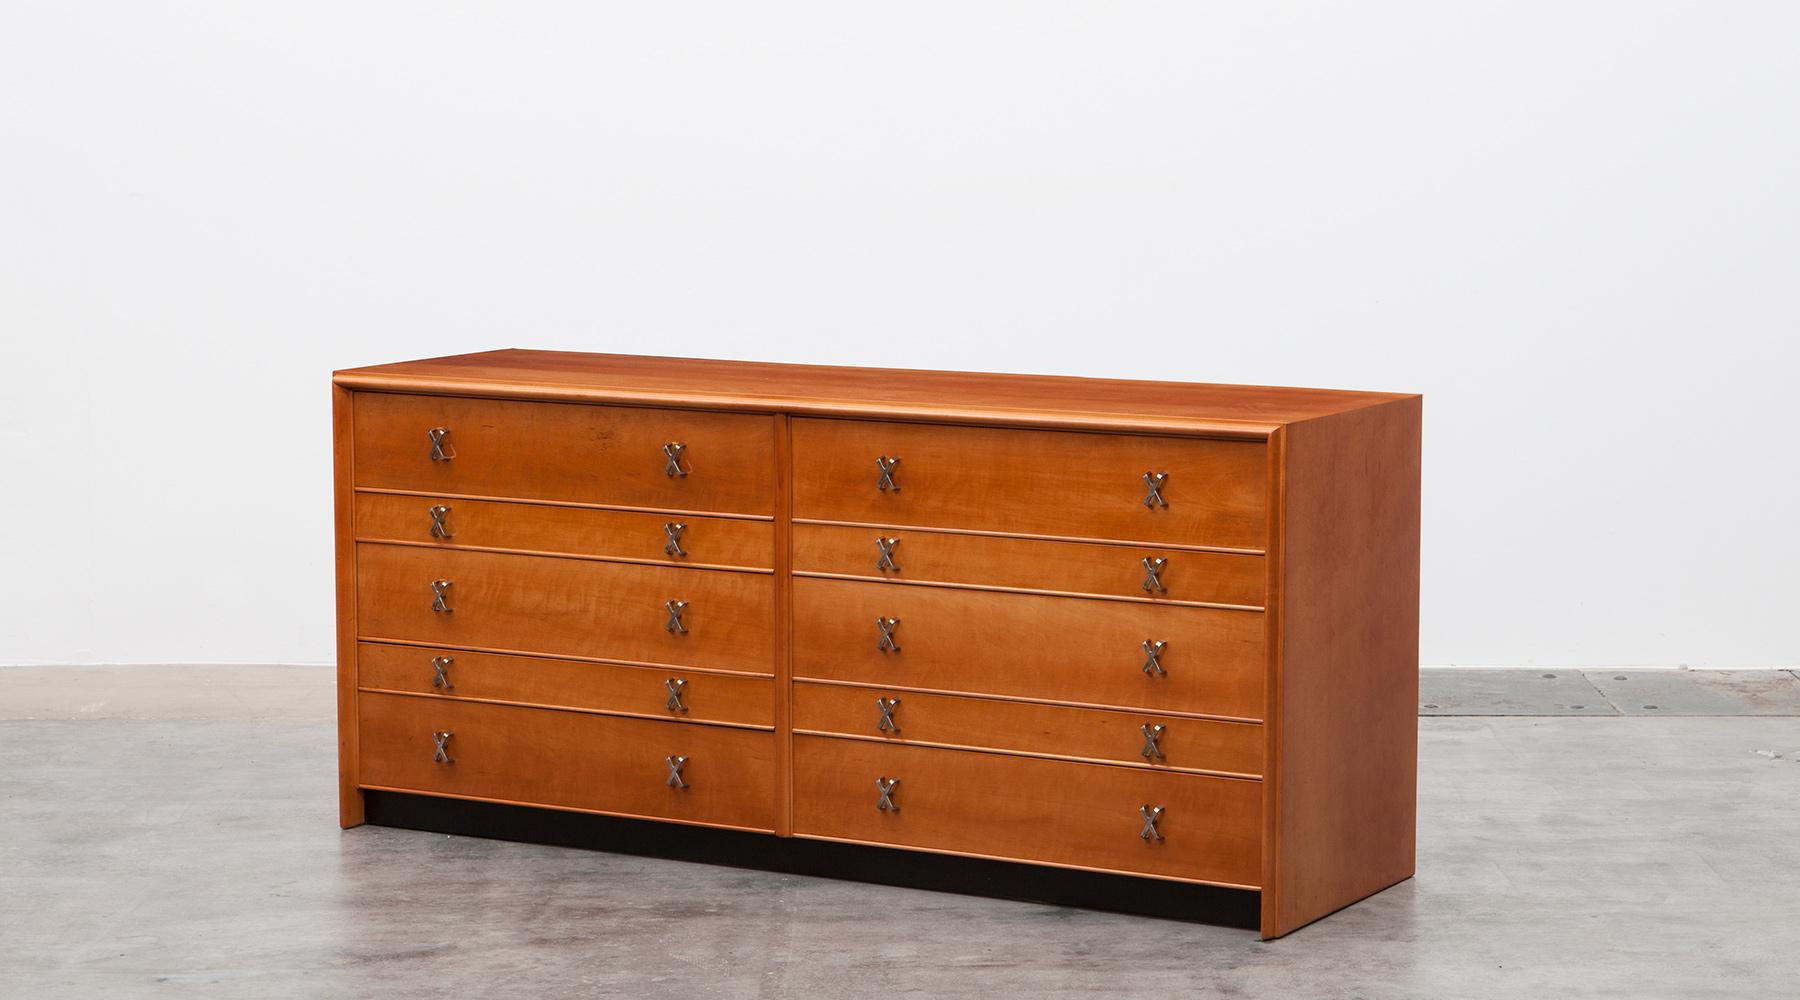 Sideboard in birch, brass details by Paul Frankl, USA, 1950.

The sideboard designed by Paul Frankl in maple has ten drawers in two different sizes. The small drawers are internally divided with small compartments. The famous Paul Frankl 